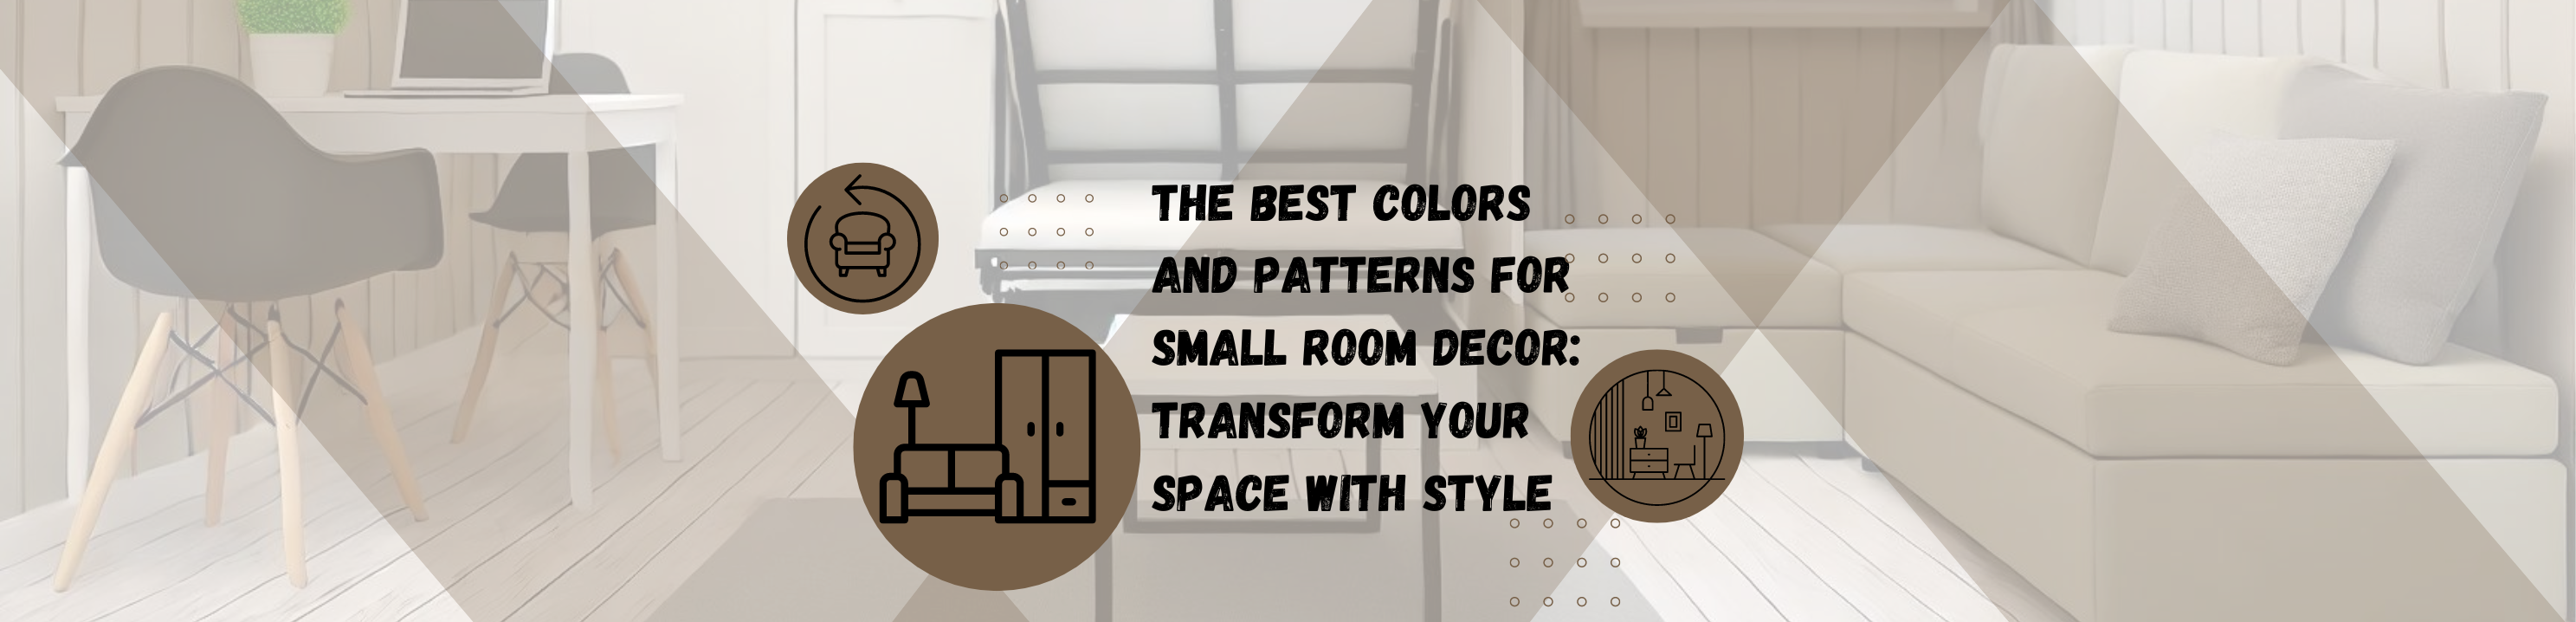 The Best Colors and Patterns for Small Room Decor: Transform Your Space with Style